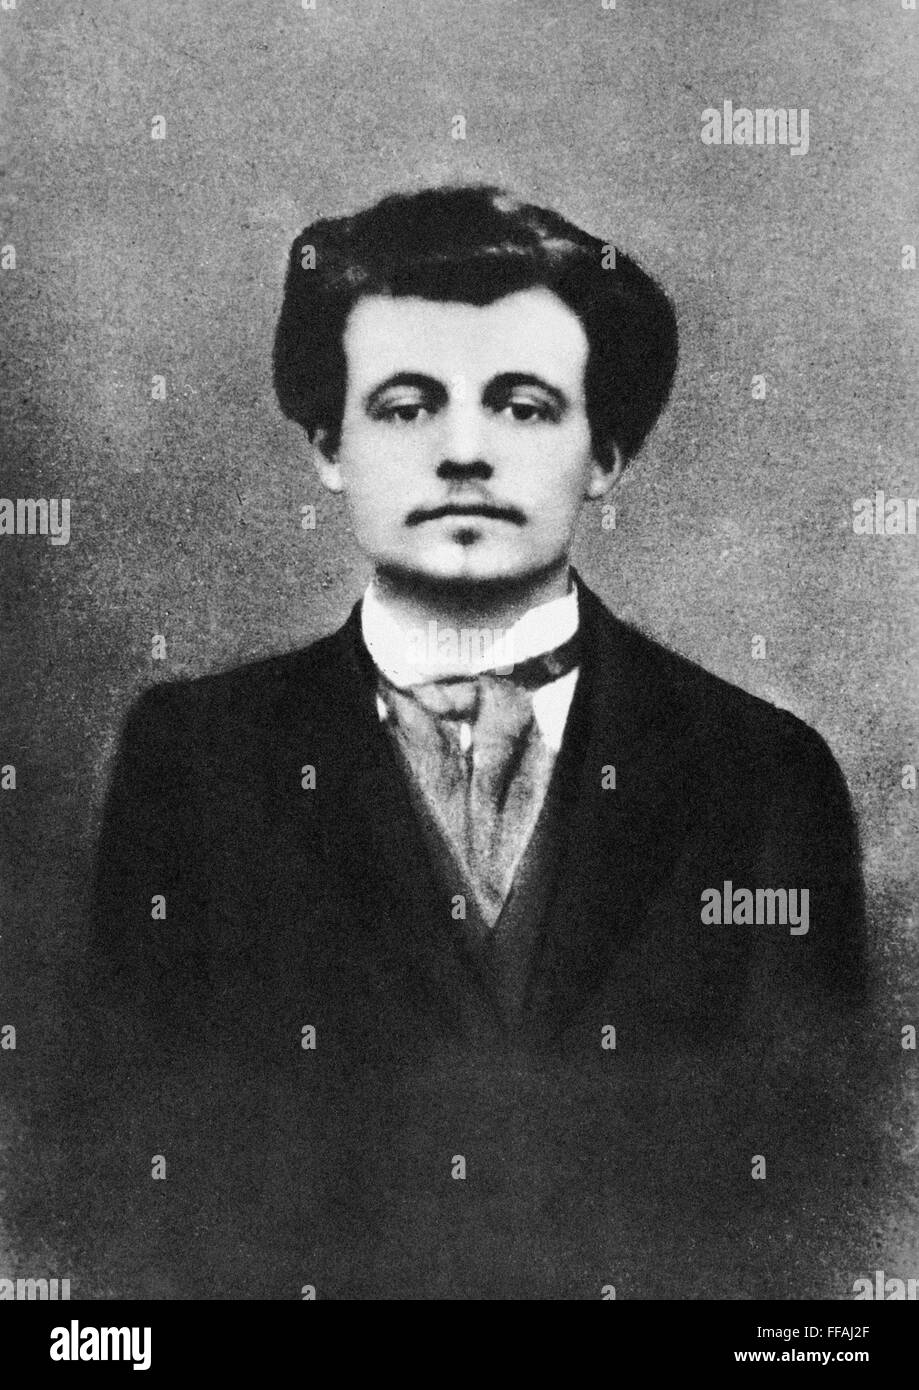 ALFRED JARRY (1873-1907). /nFrench writer. Stock Photo